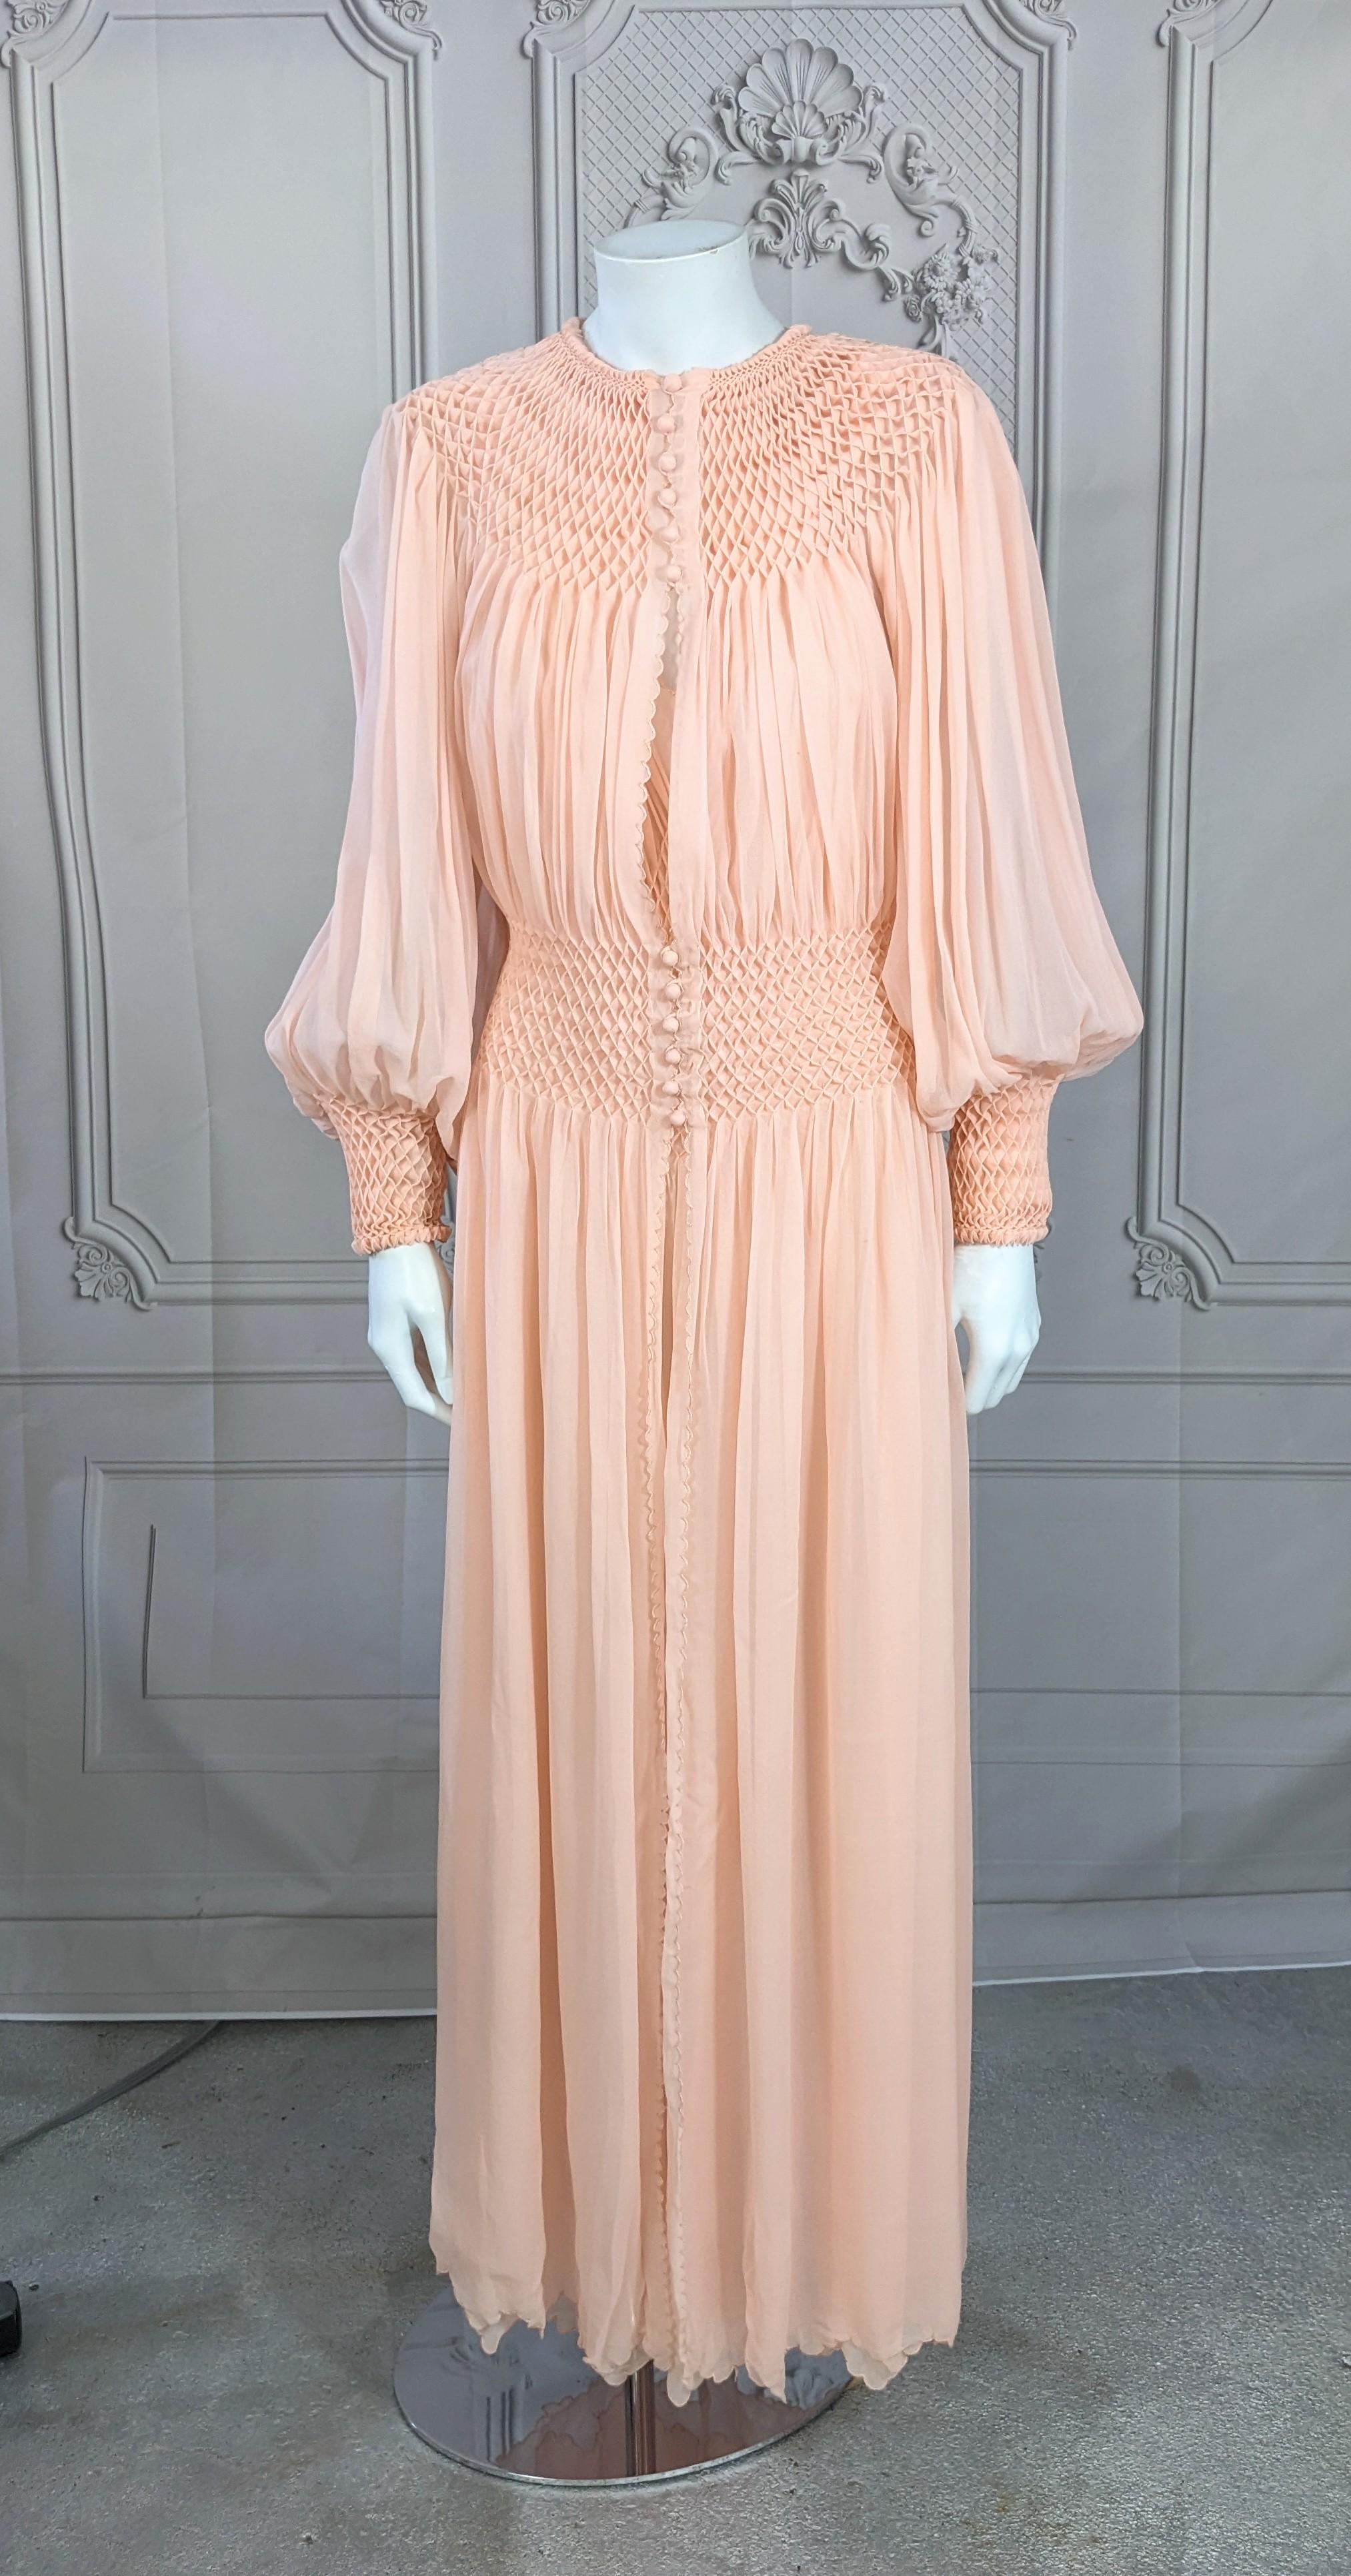 Art Deco Shell Pink Silk Chiffon Smocked Ensemble almost completely handmade of French origin. This ensemble is 95% hand made, with even all the edges hand embroidered with scalloped silk edging. Very difficult to technically construct this garment